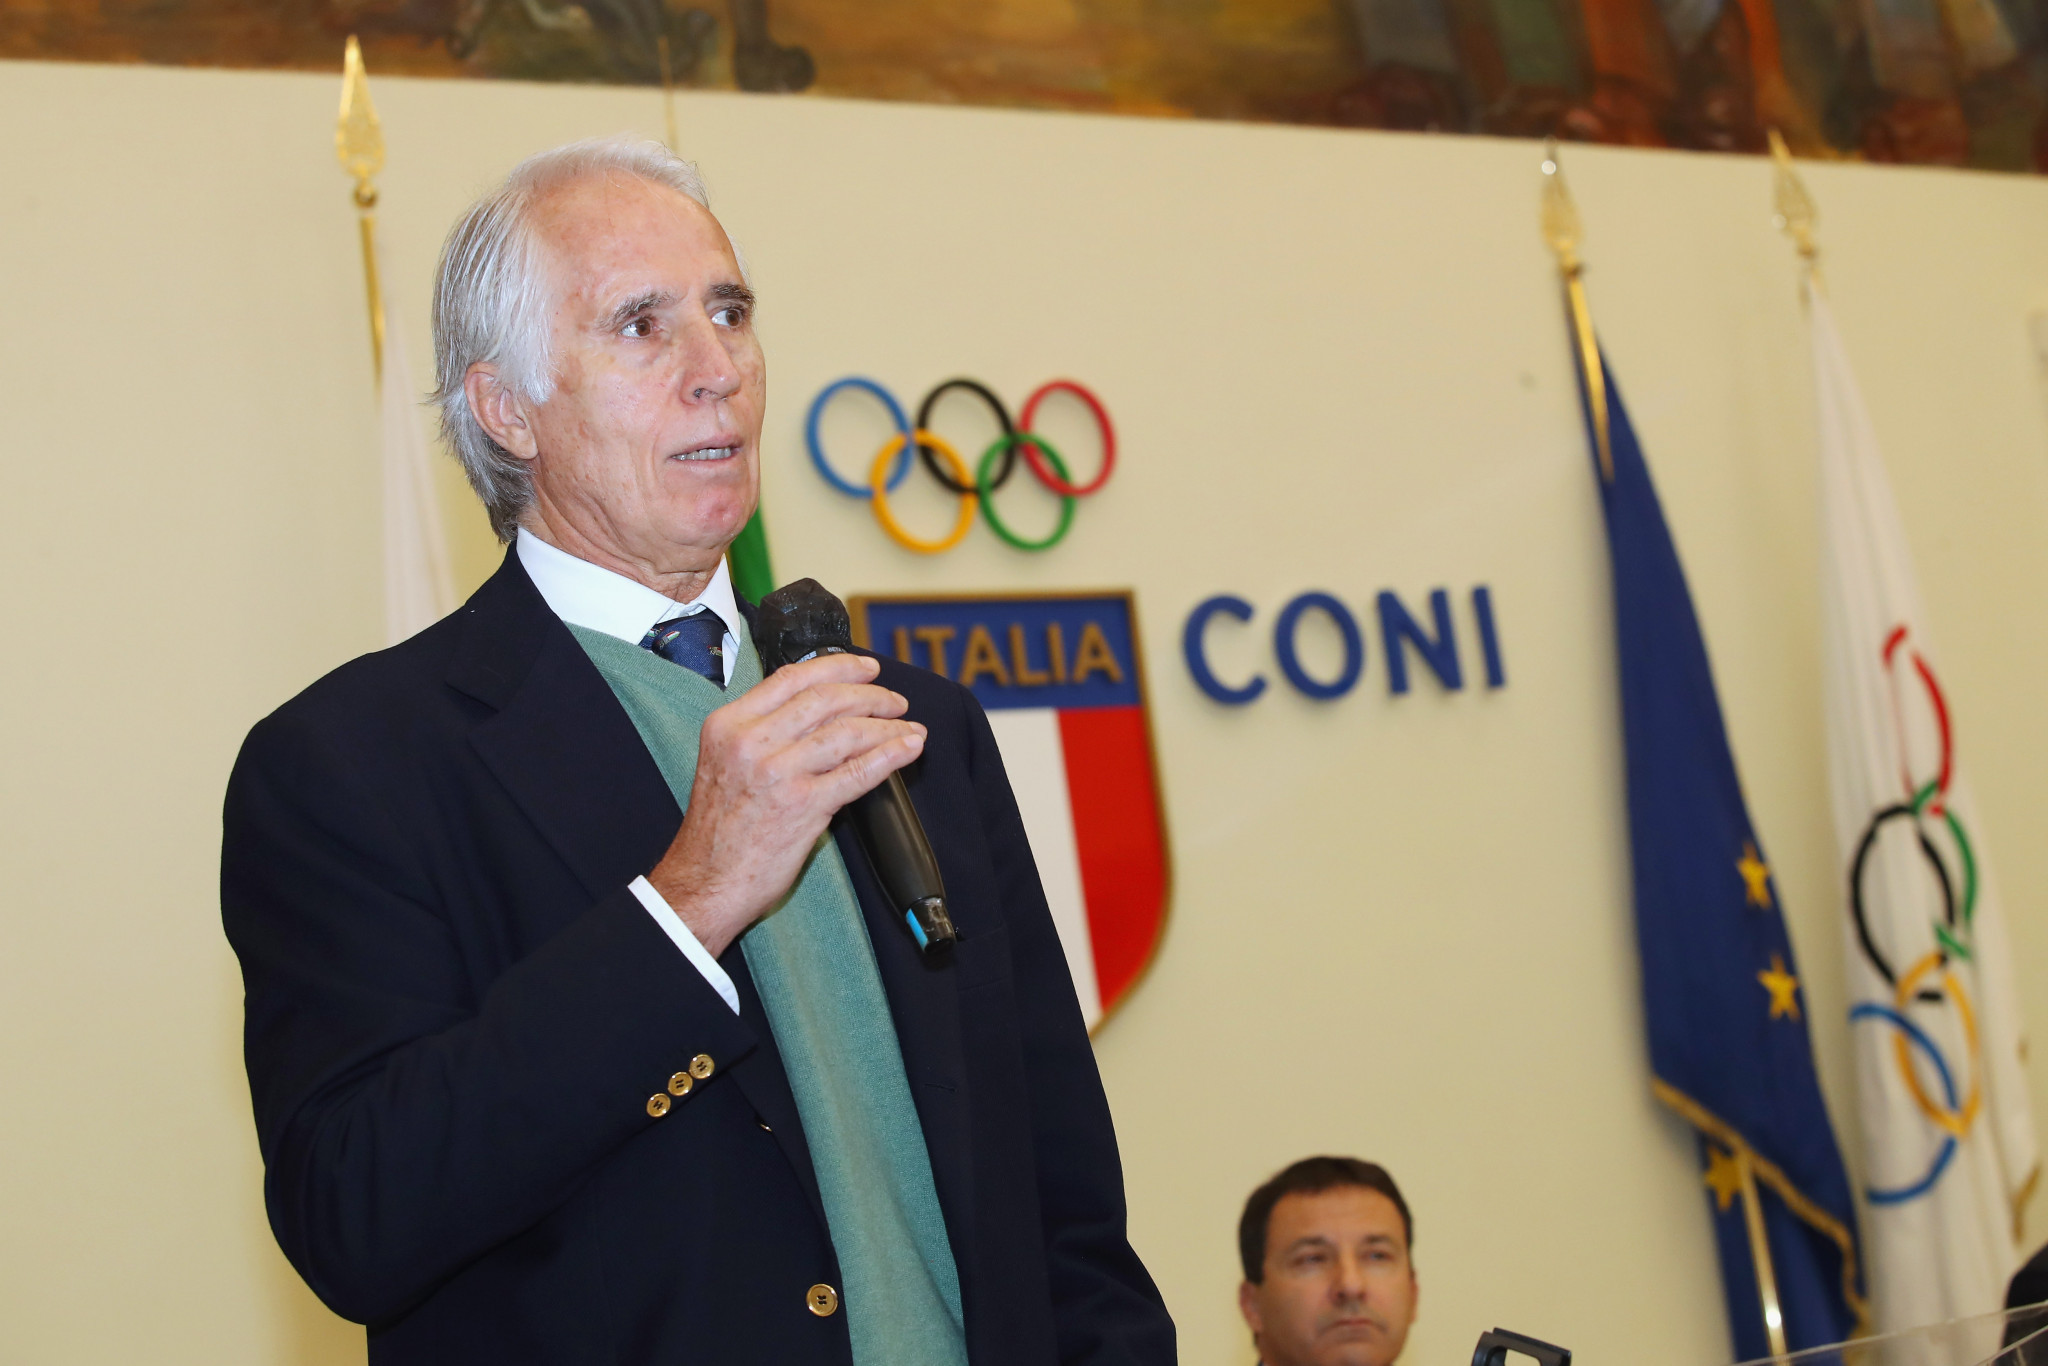 Milan Cortina 2026 President Giovanni Malagò said he had "great confidence" in preparations for the Winter Olympics ©Getty Images